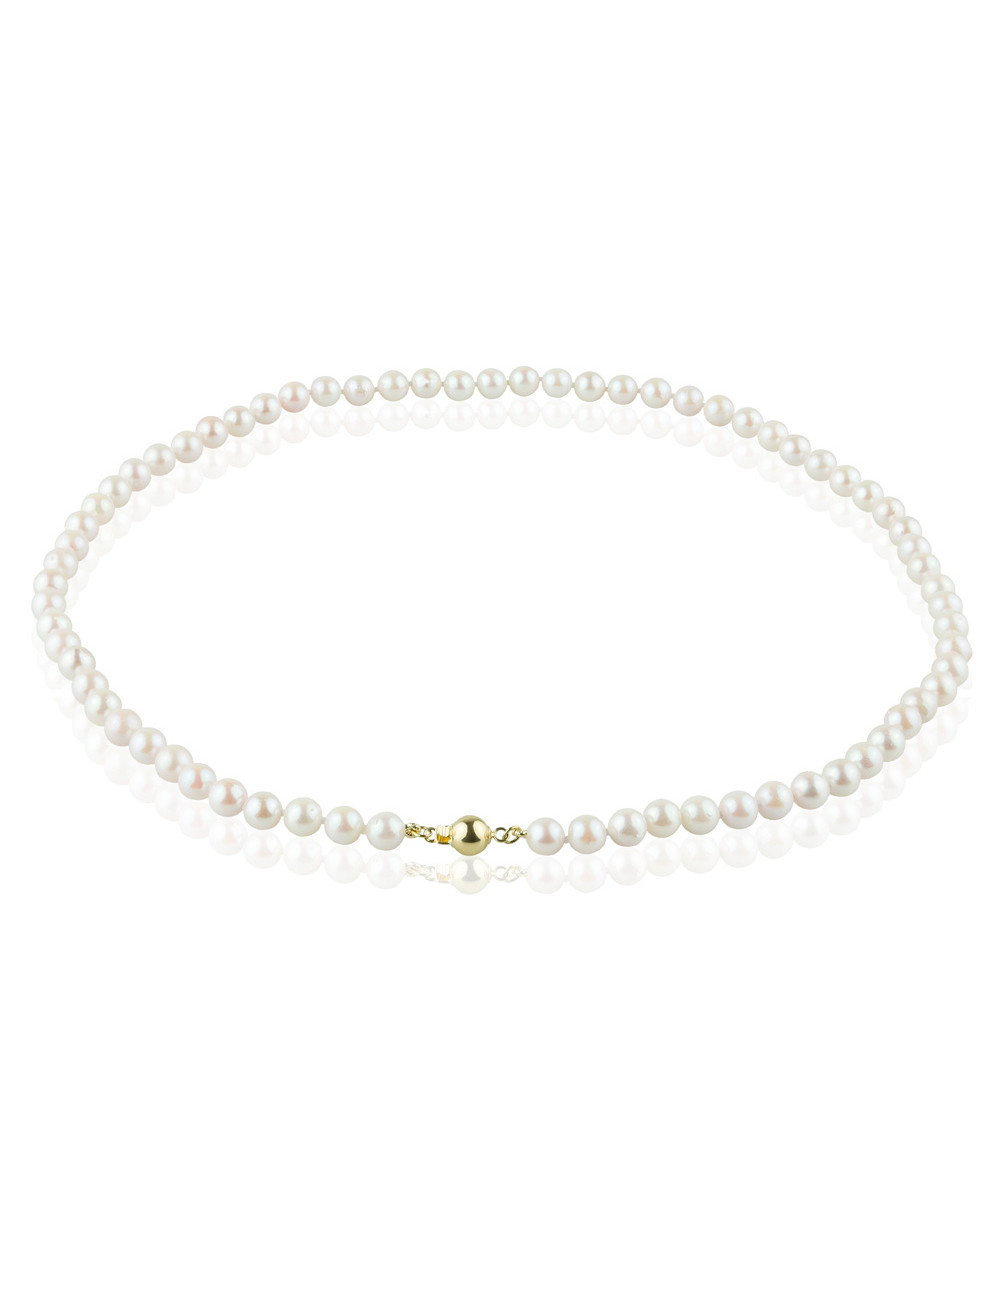 Necklace of small white Akoya pearls with yellow gold ball clasp NM5560G3